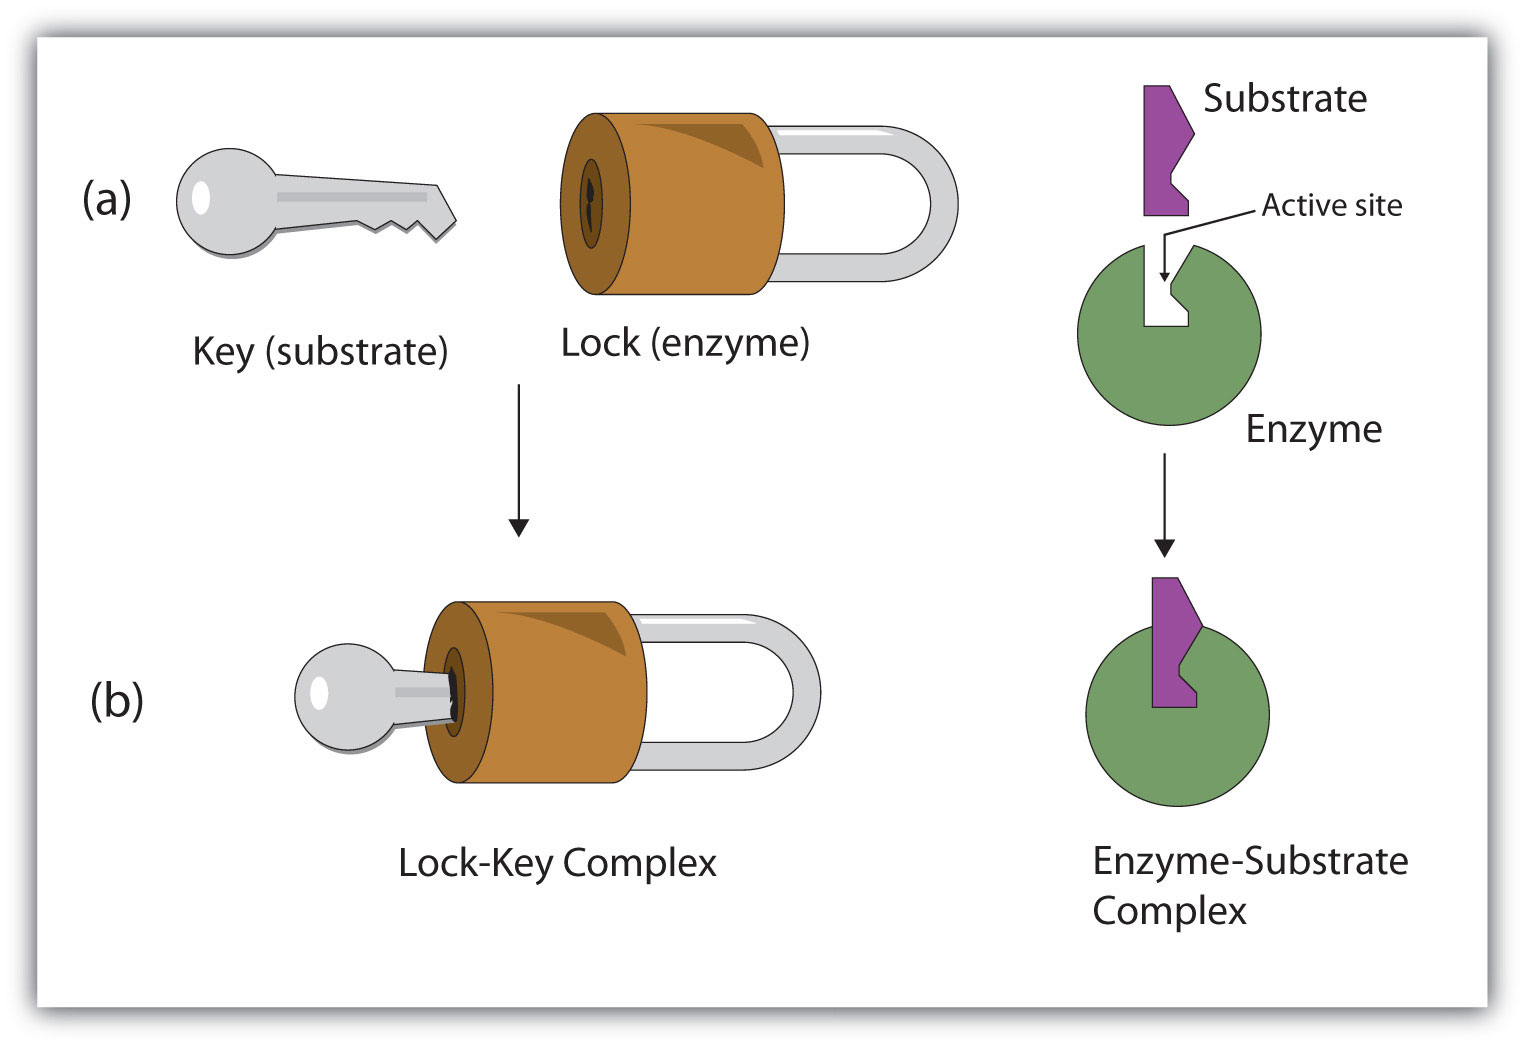 Introduction to Enzymes